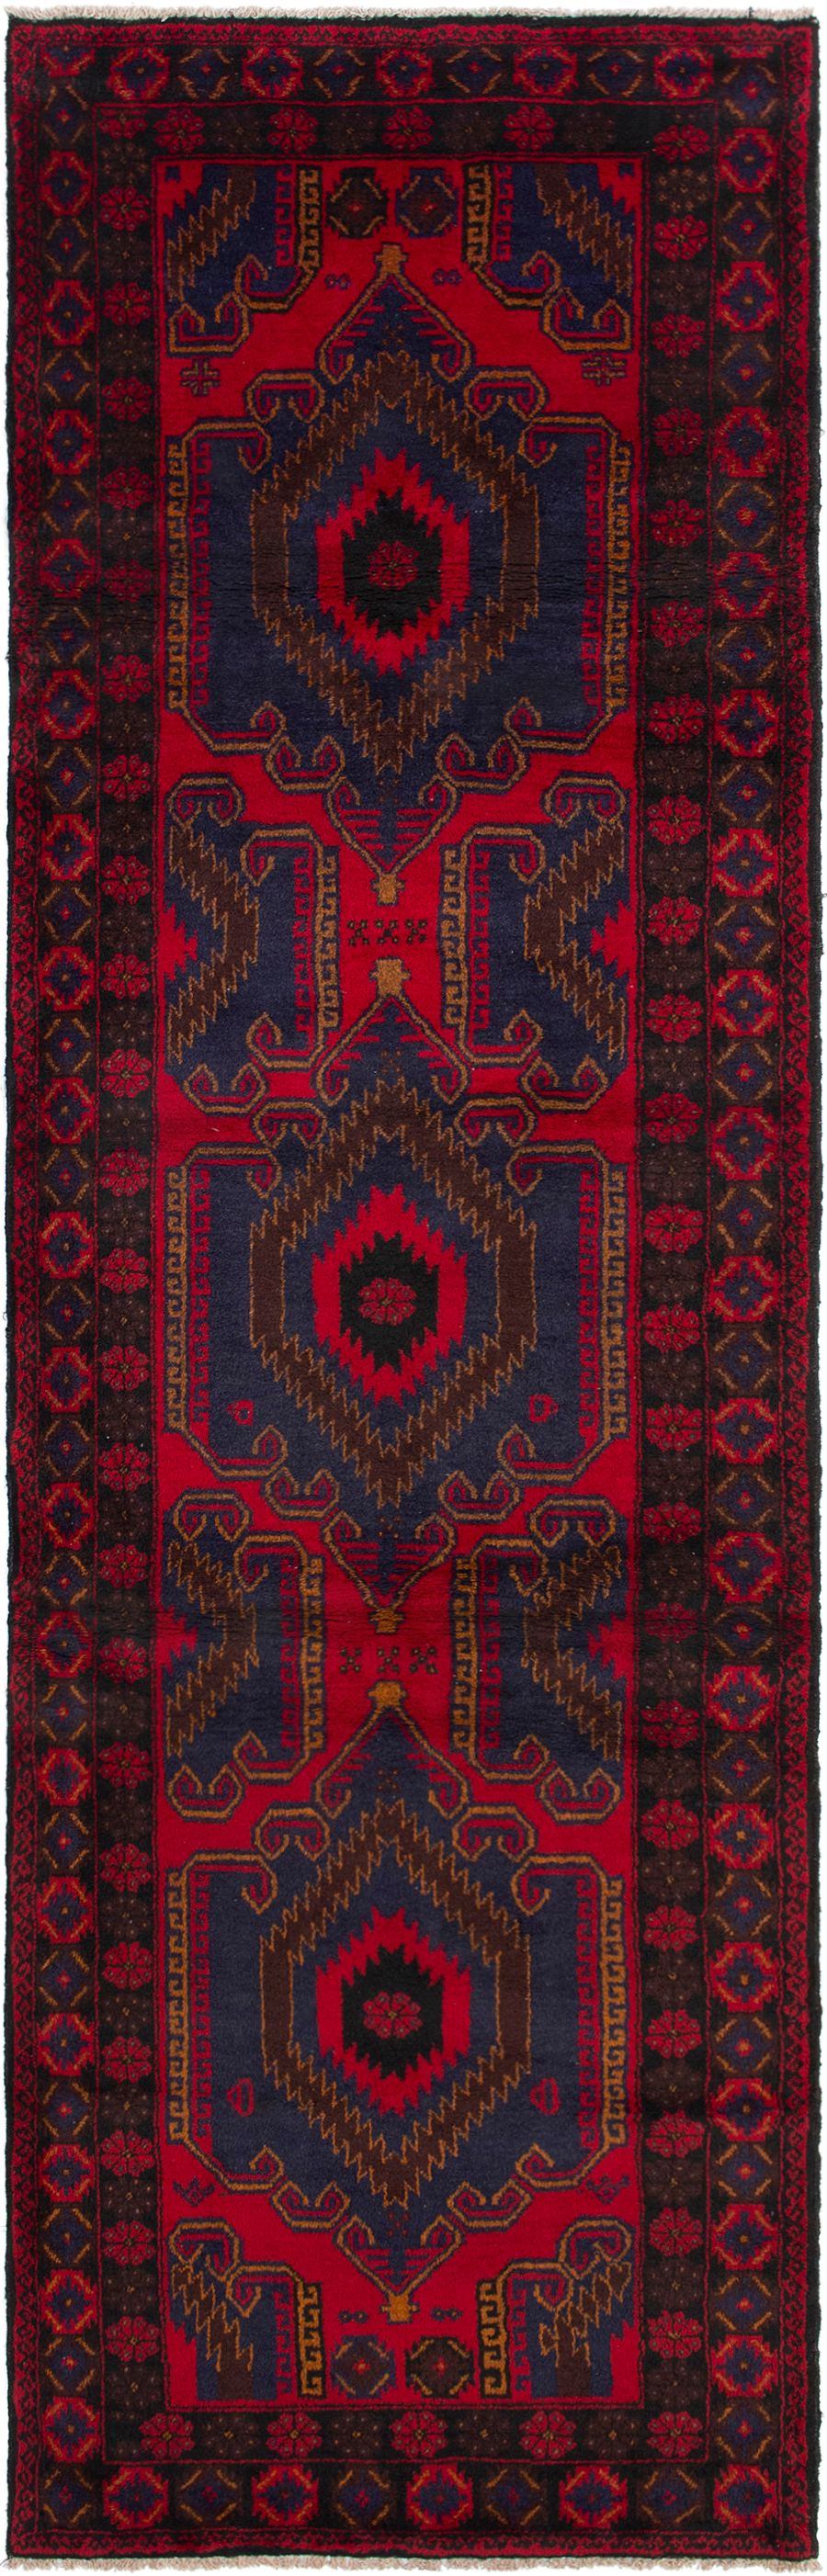 Hand-knotted Rizbaft Red Wool Rug 3'3" x 11'0" Size: 3'3" x 11'0"  